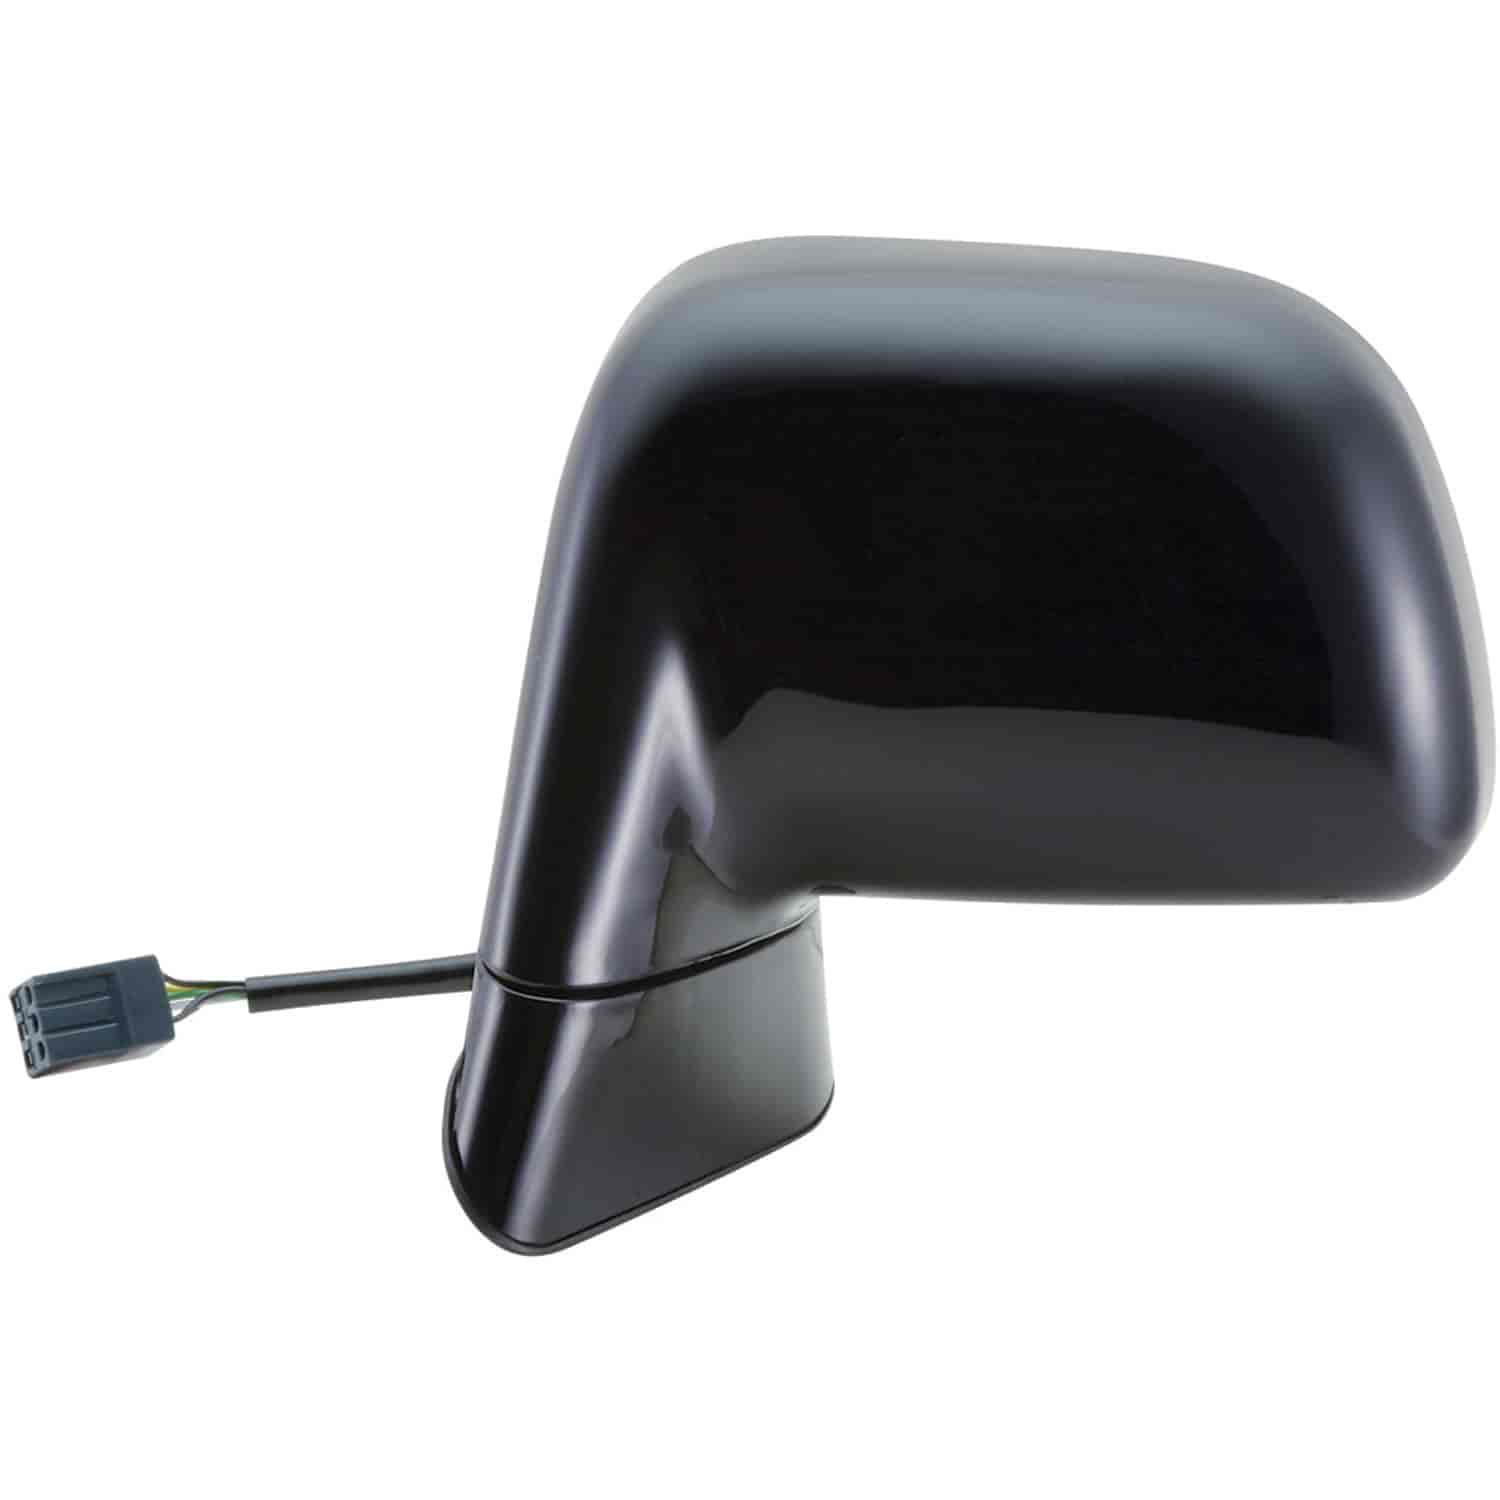 OEM Style Replacement mirror for 97 Lincoln Town Car w/o memory driver side mirror tested to fit and